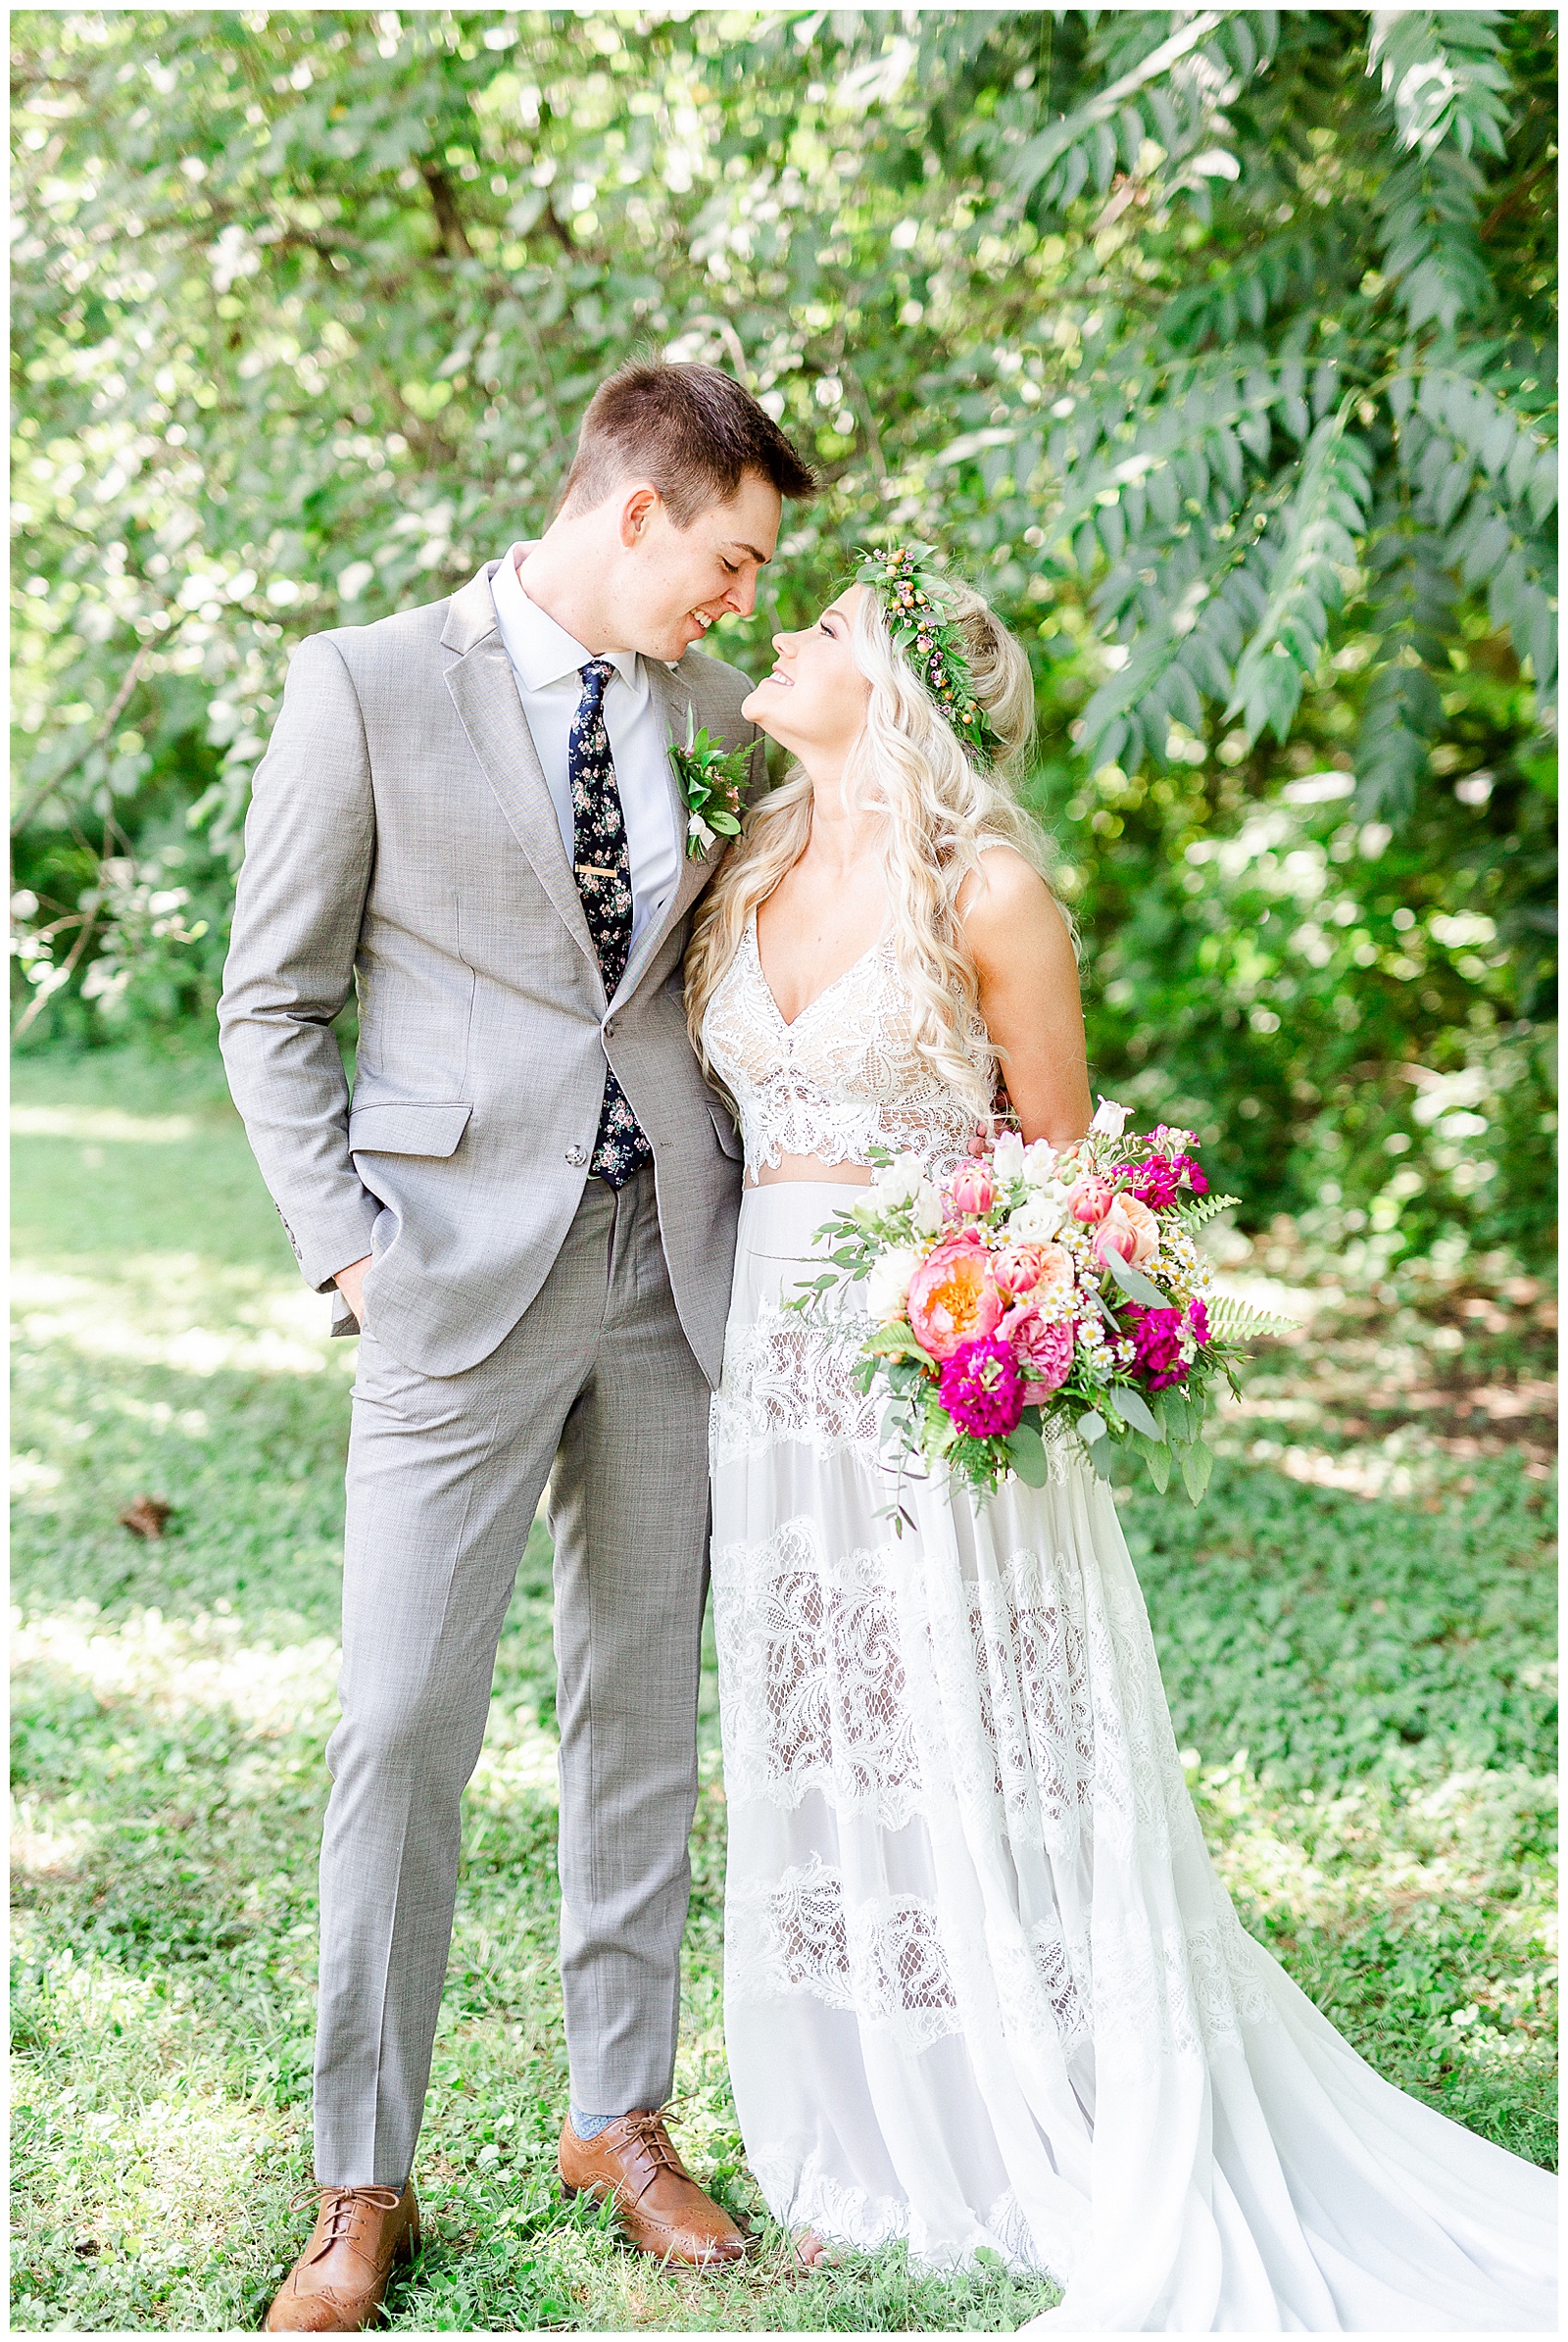 Enchanting Woodland Portraits of Bride and Groom from Boho Chic Wedding in Charlotte, NC | check out the full wedding at KevynDixonPhoto.com